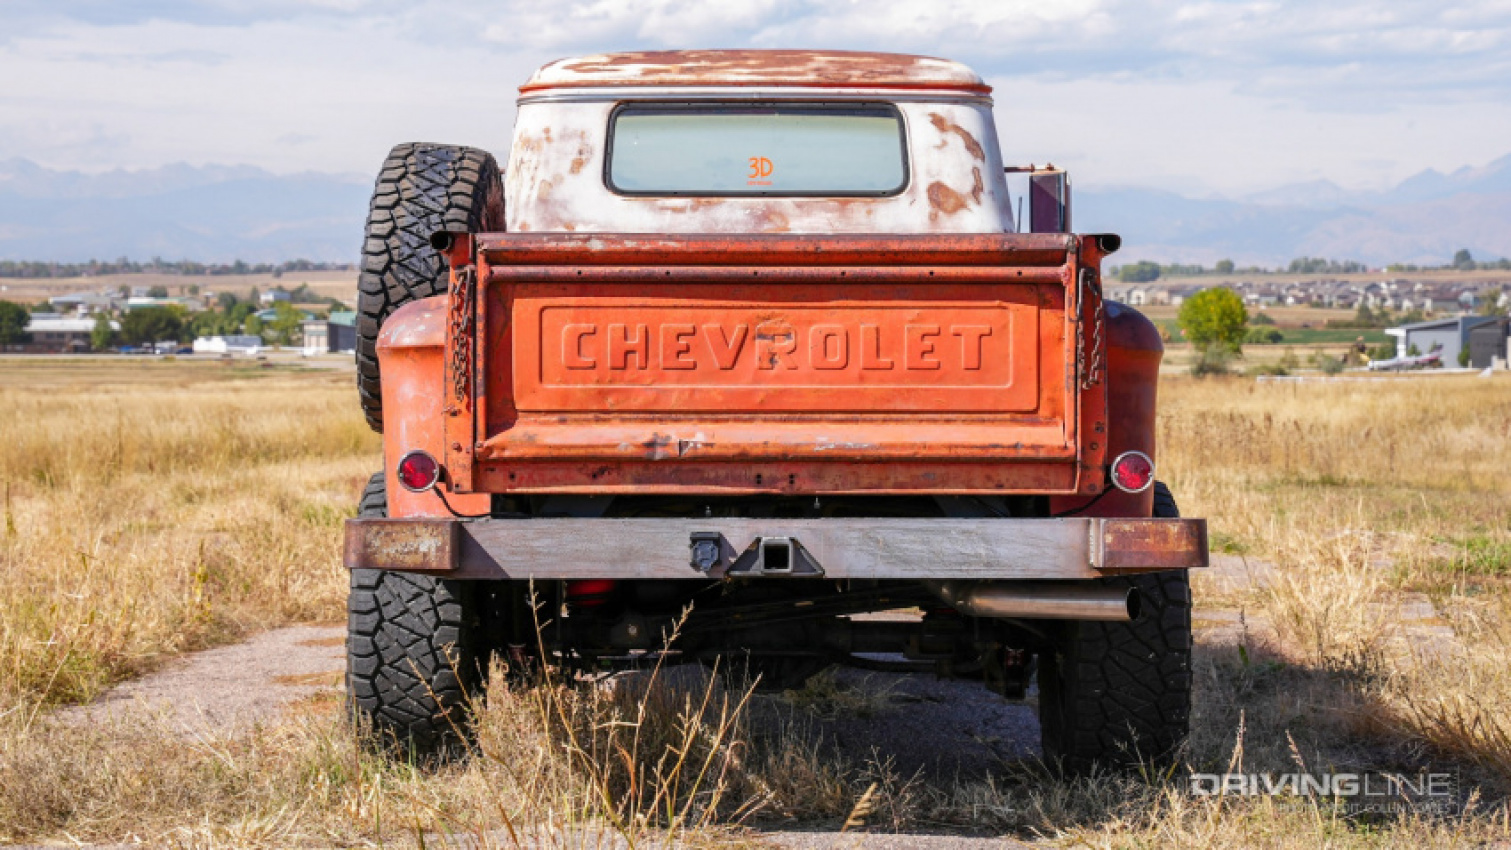 adventure, autos, cadillac, cars, off-road restomod colorado forest service truck: classic '59 chevy apache truck riding on a '13 cadillac chassis